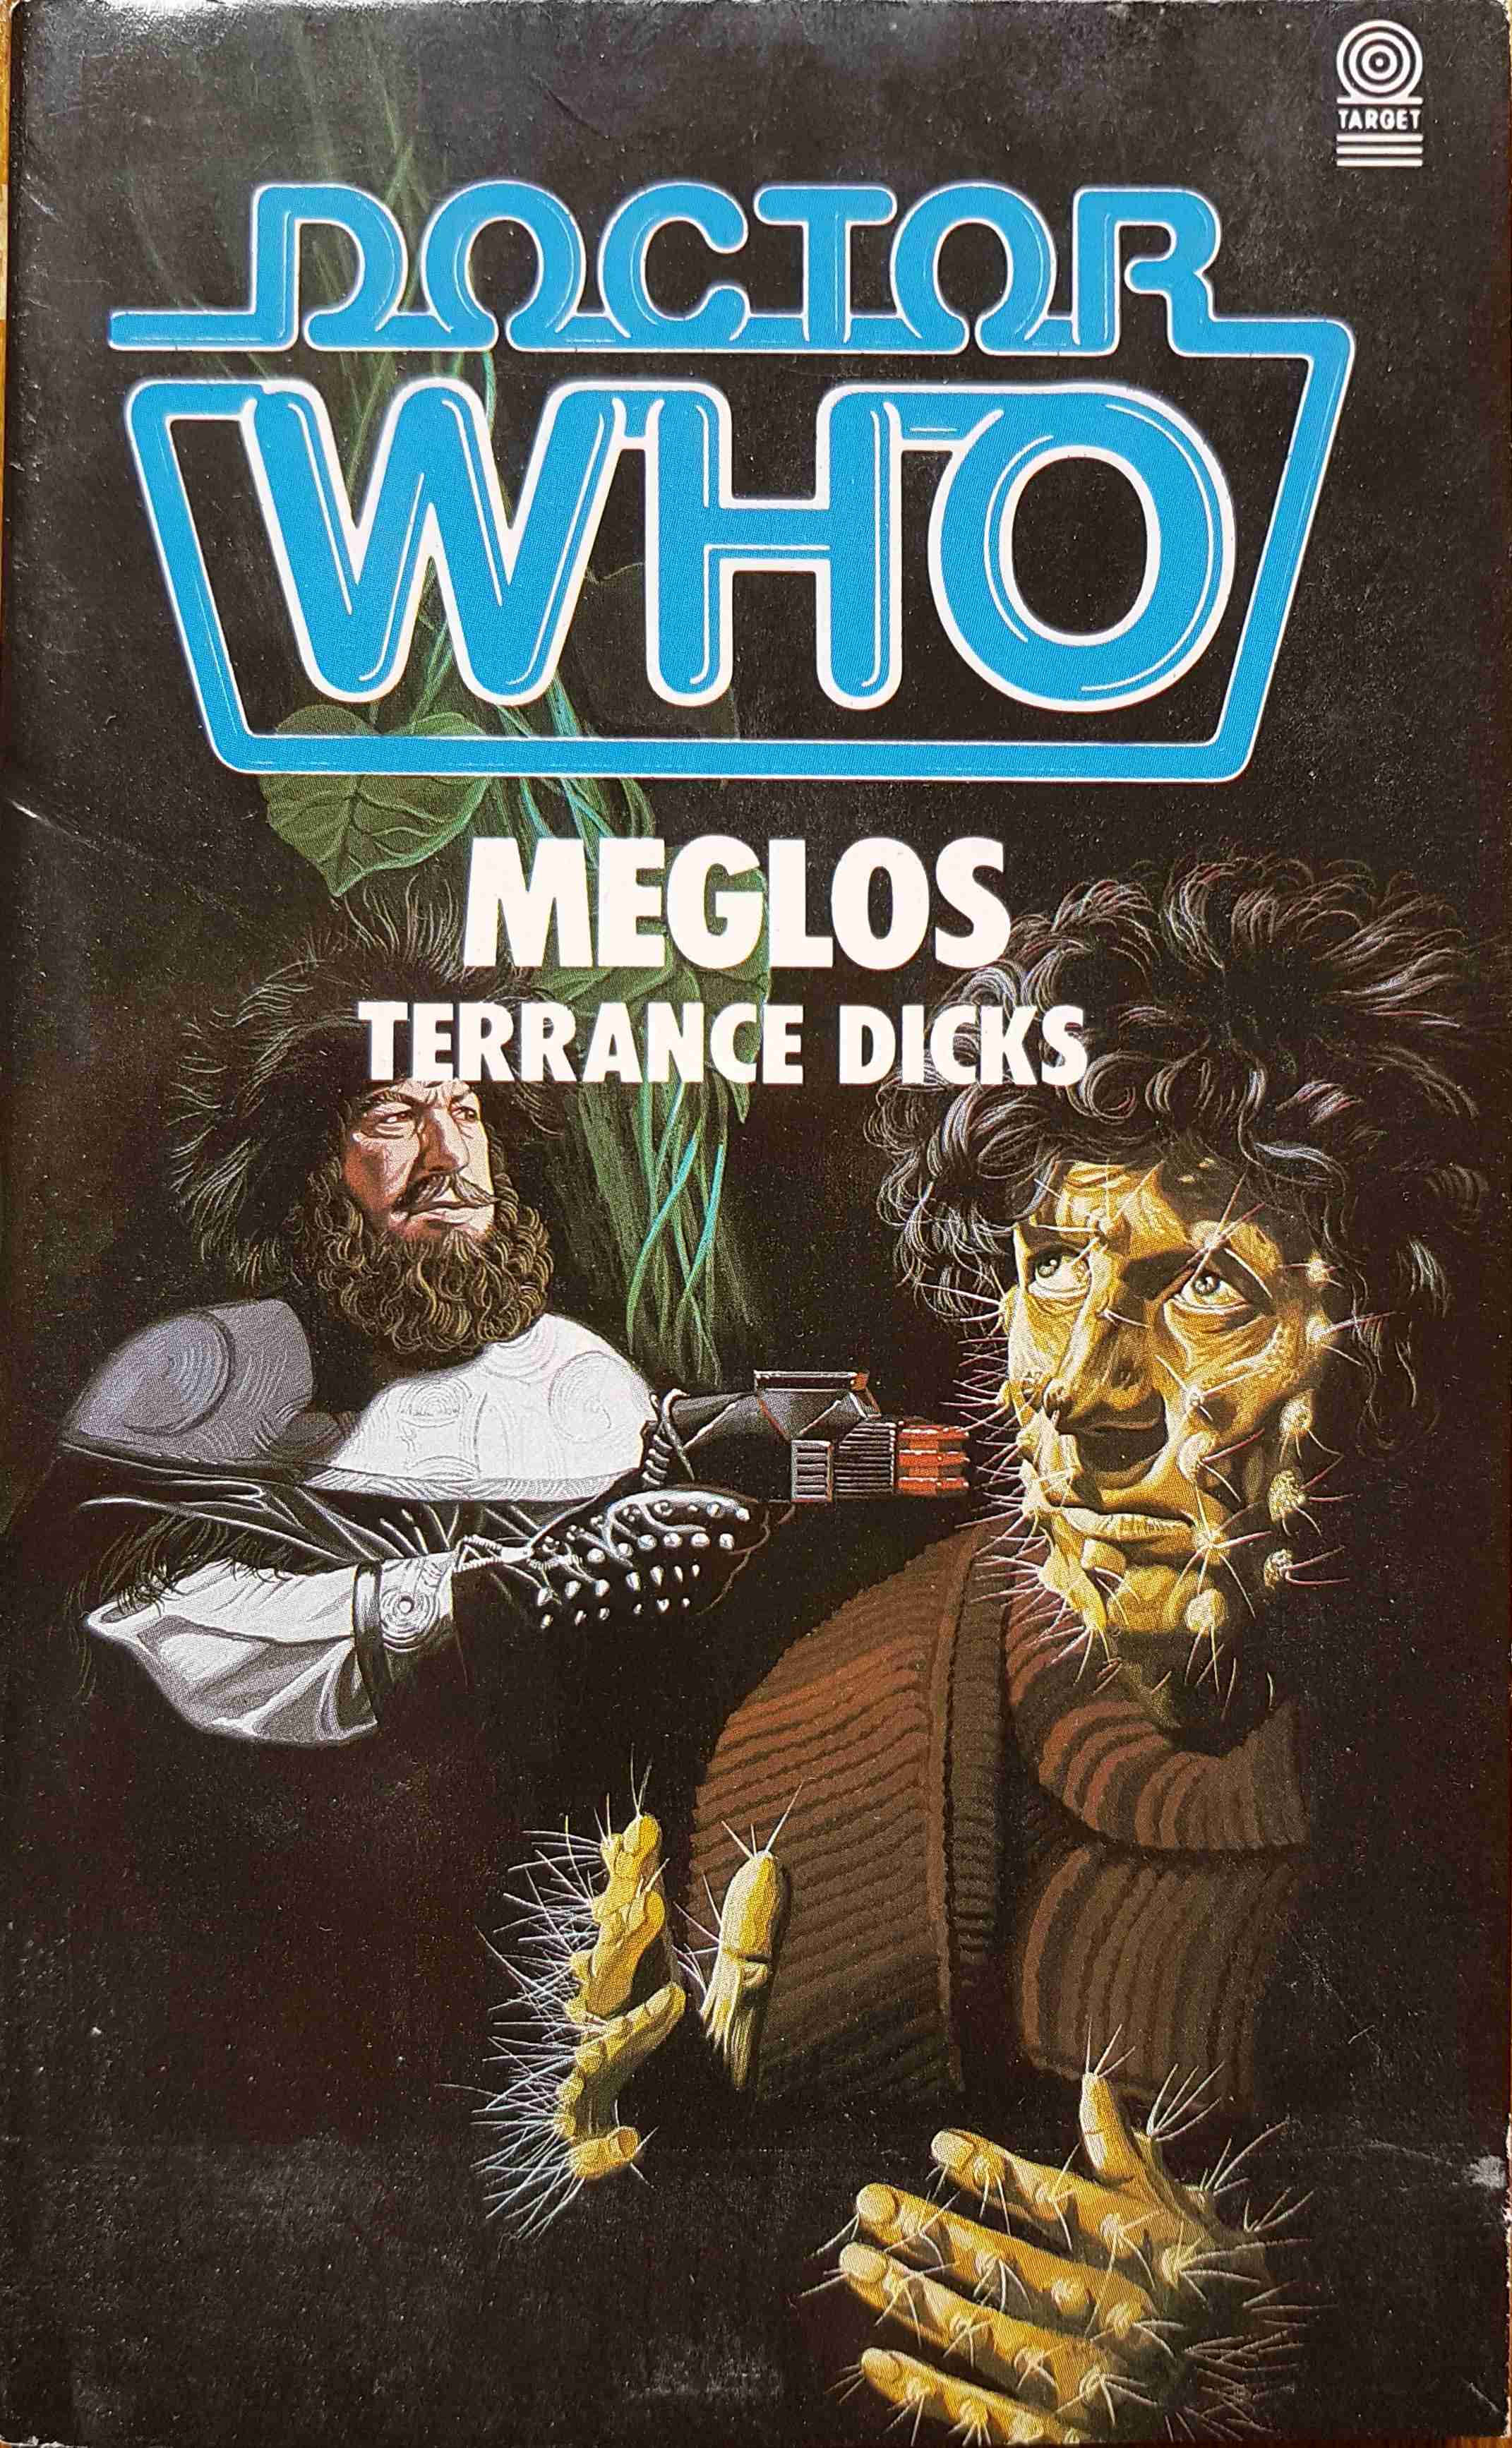 Picture of 0-426-20316-X Doctor Who - Meglos by artist Terrance Dicks from the BBC records and Tapes library